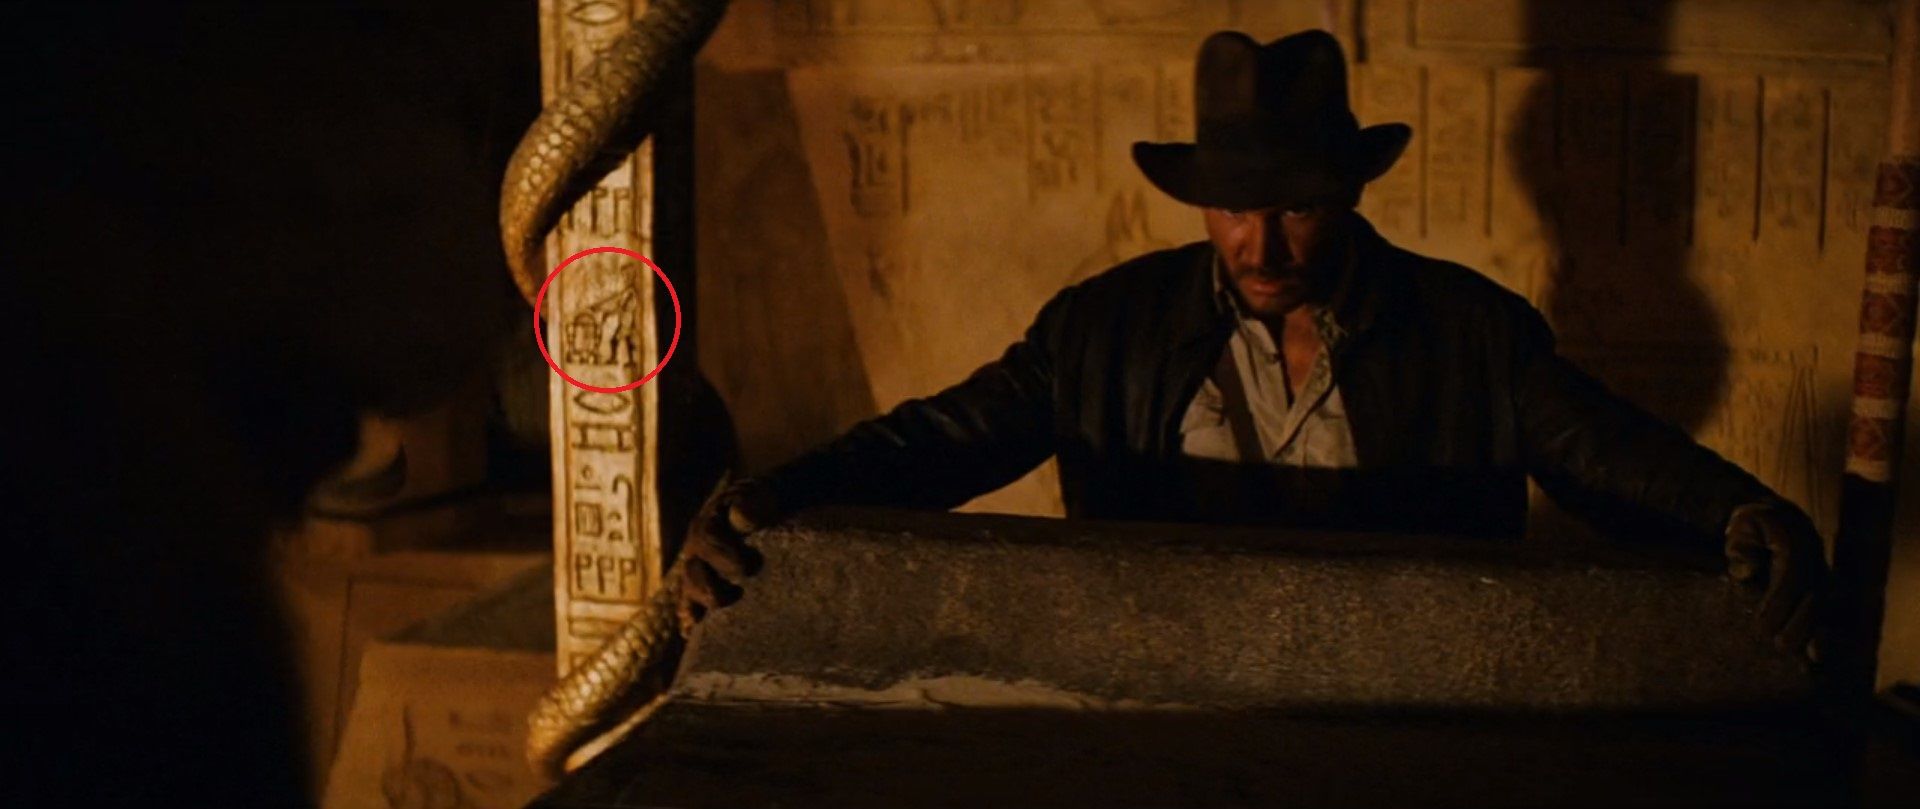 Hieroglyphs in Raiders of the Lost Ark depict C-3PO and R2-D2